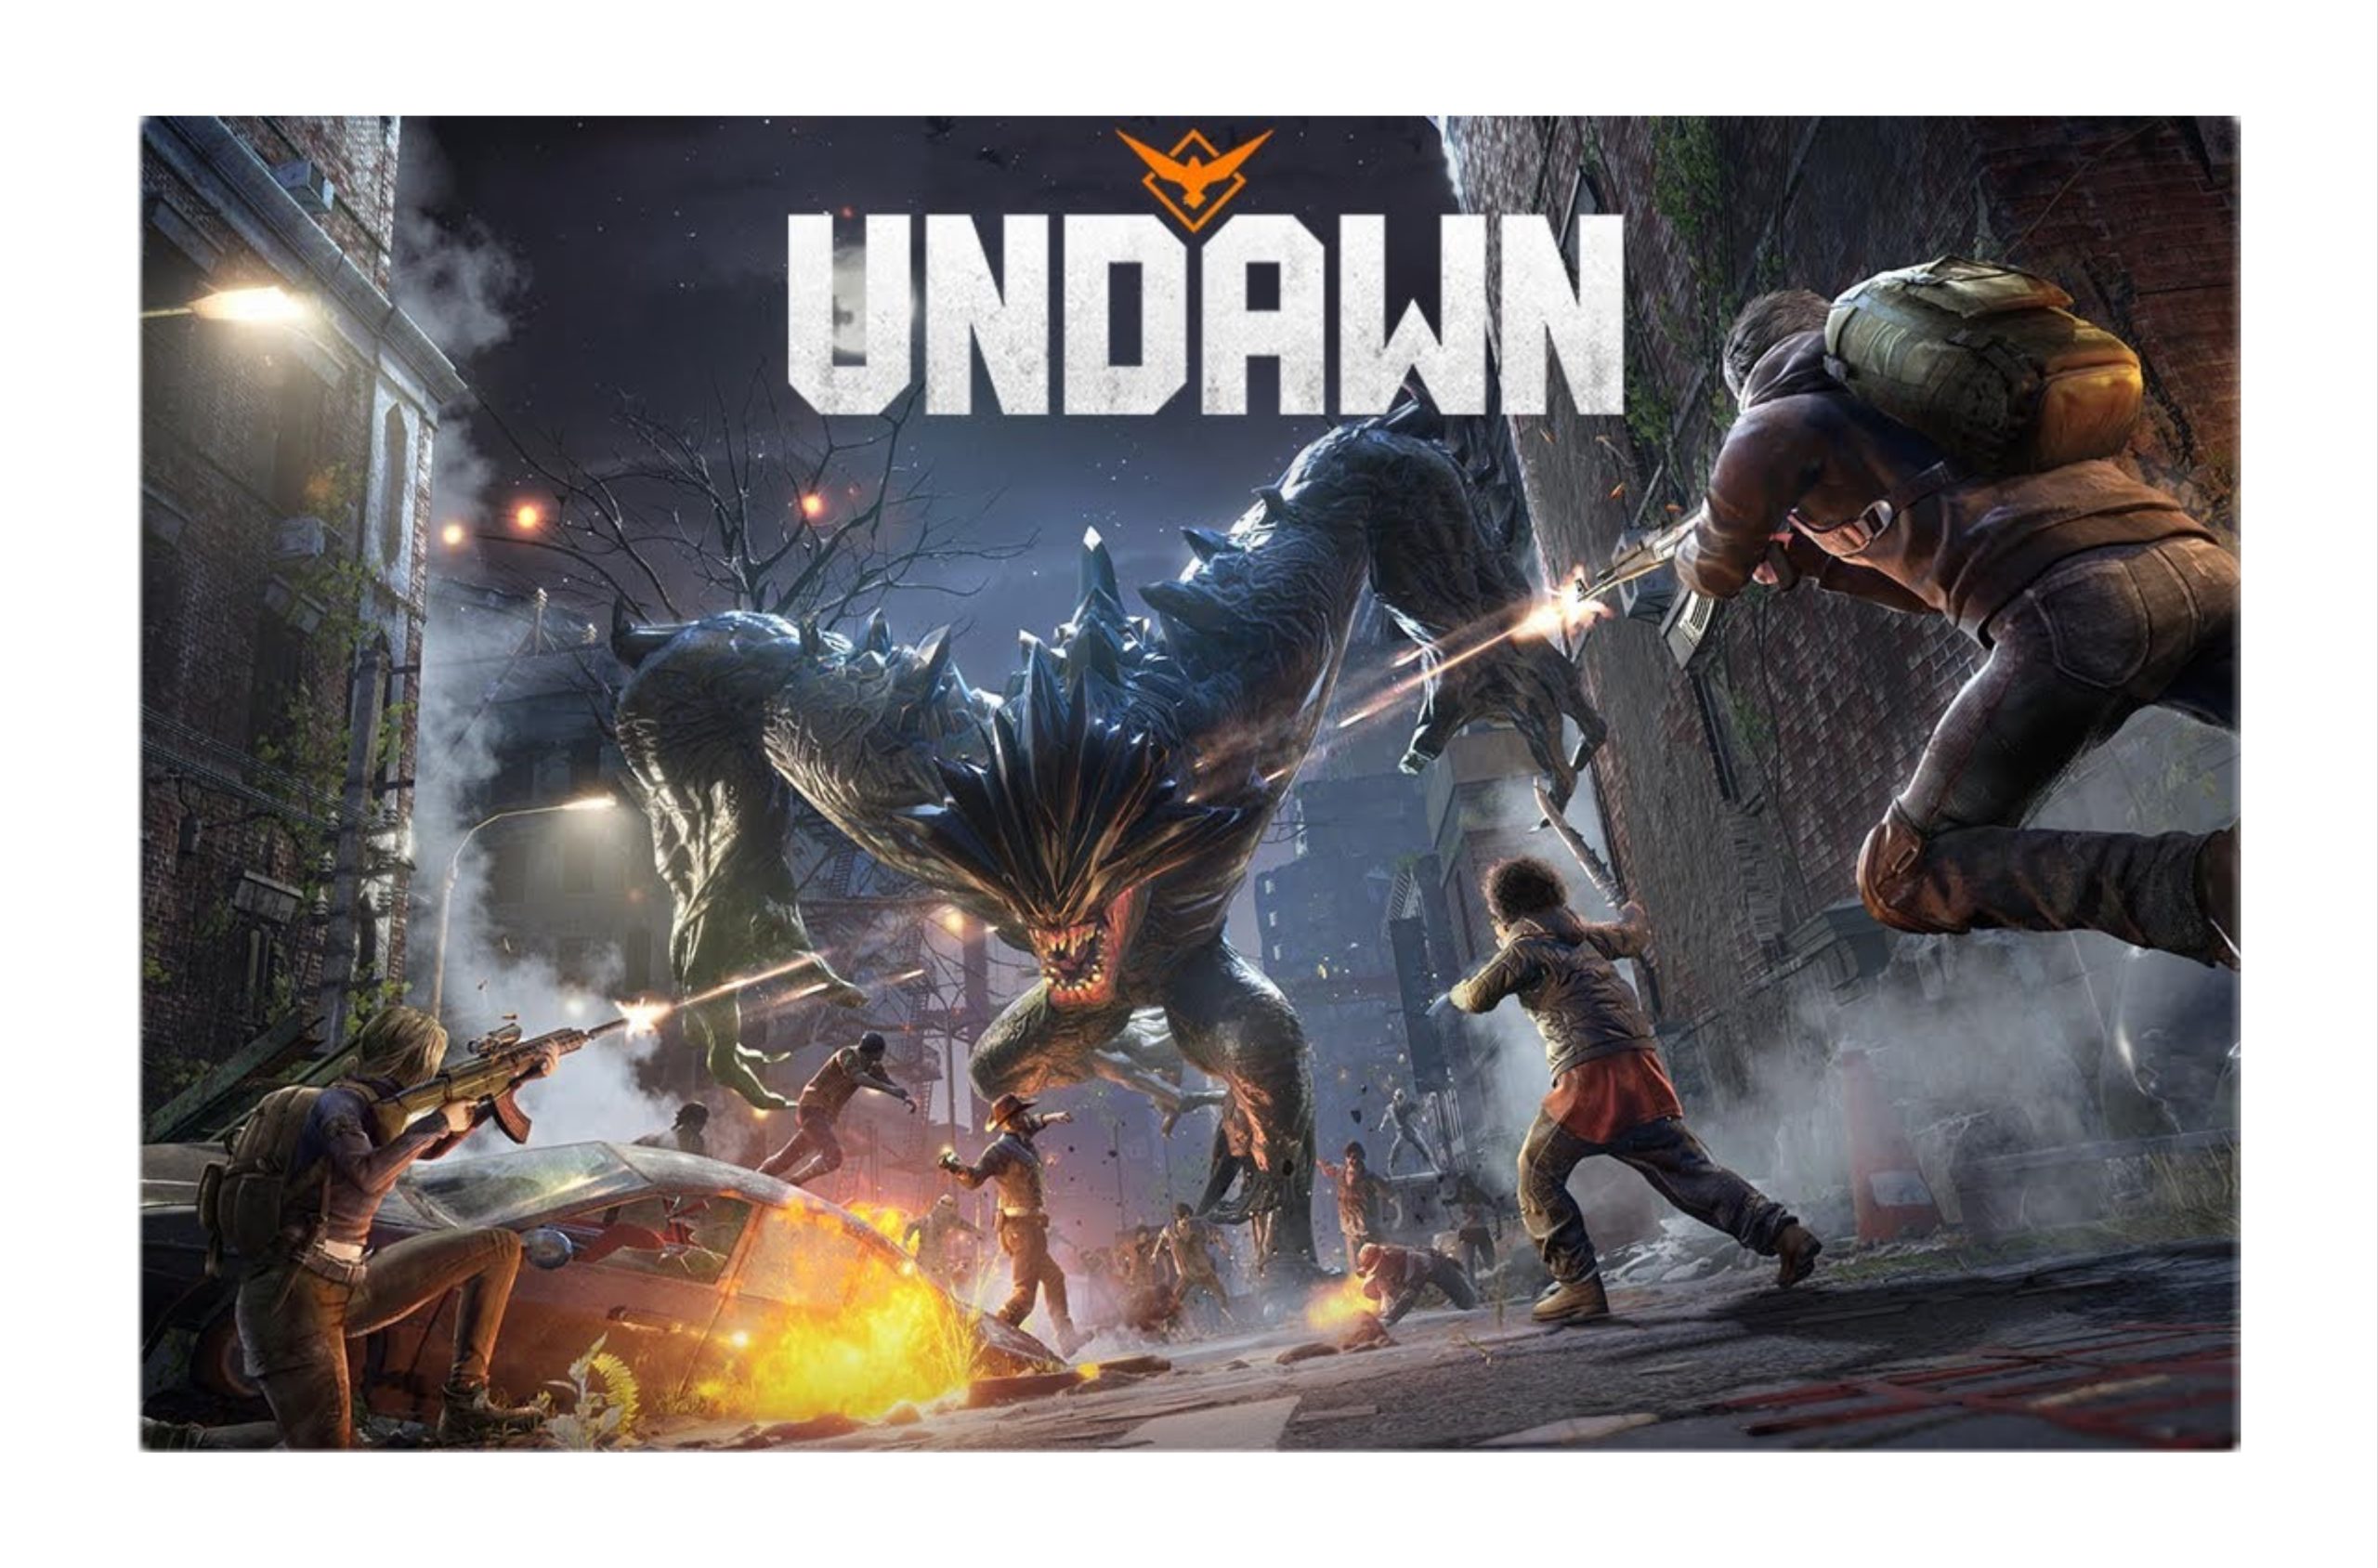 Chinese giant Tencent eyes India comeback with Undawn game launch